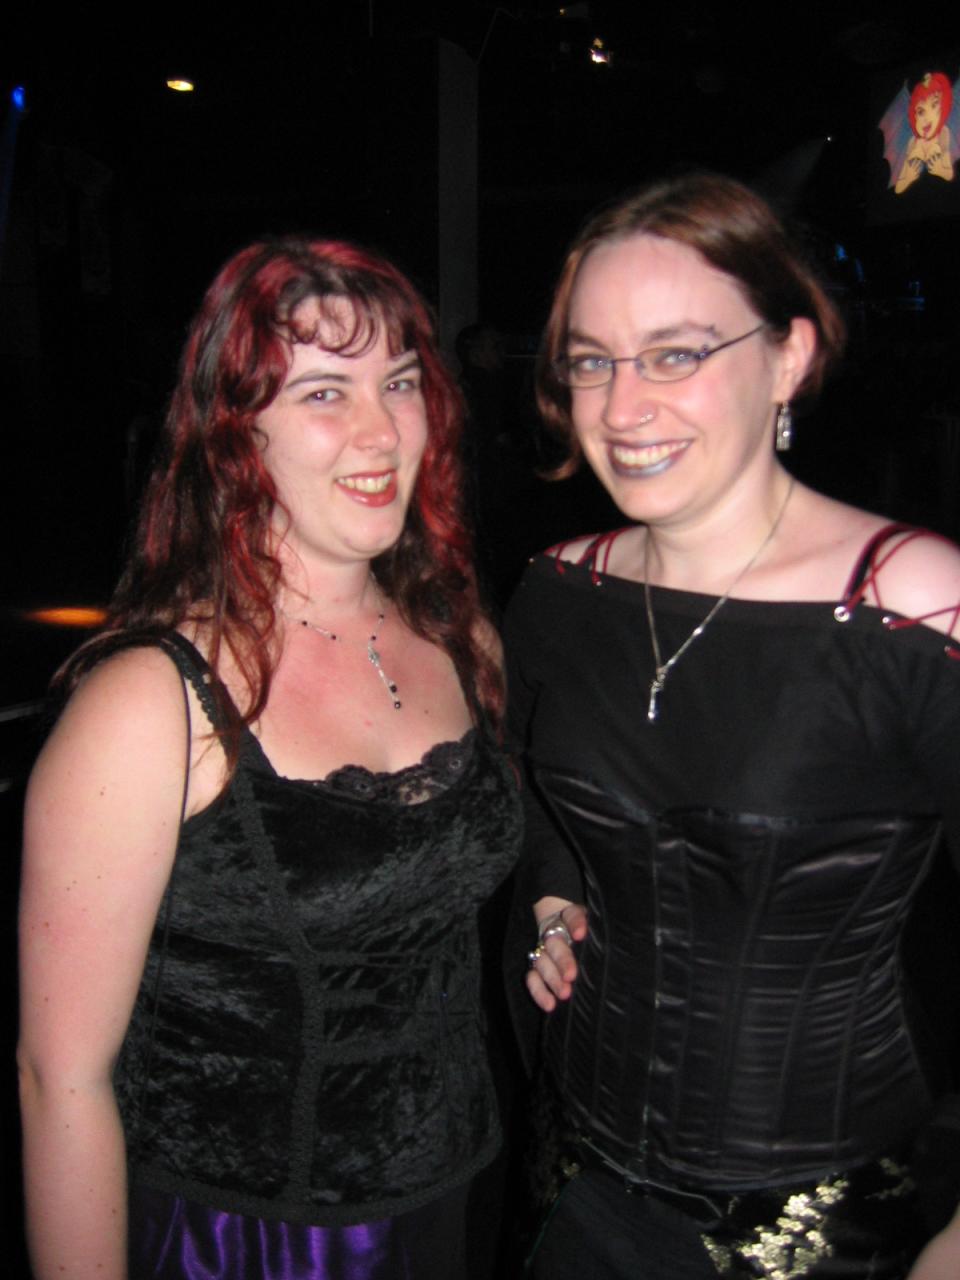 two women pose for a po together in formal dress